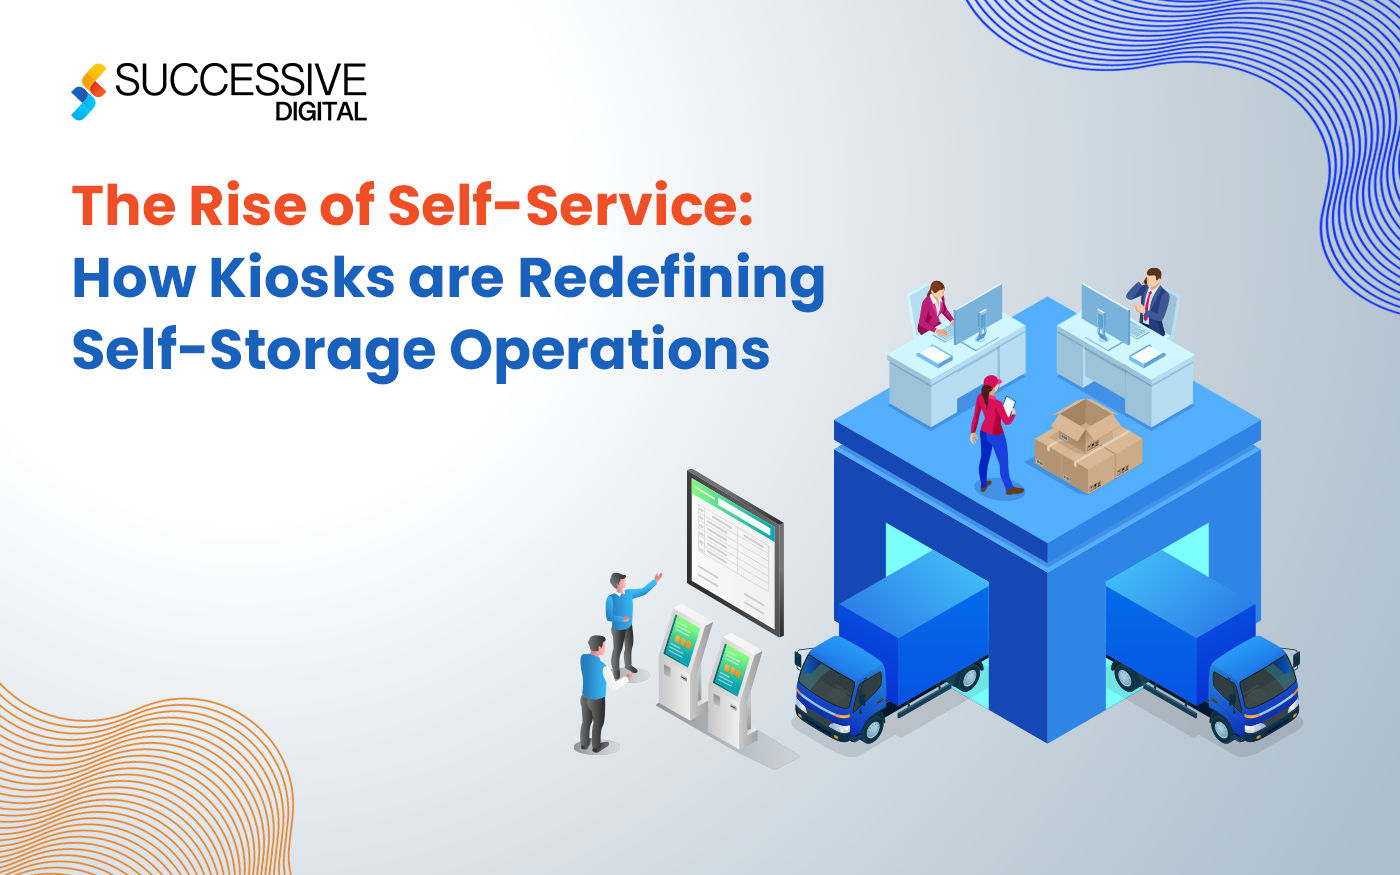 The Rise of Self-Service: How Kiosks are Redefining Self-Storage Operations